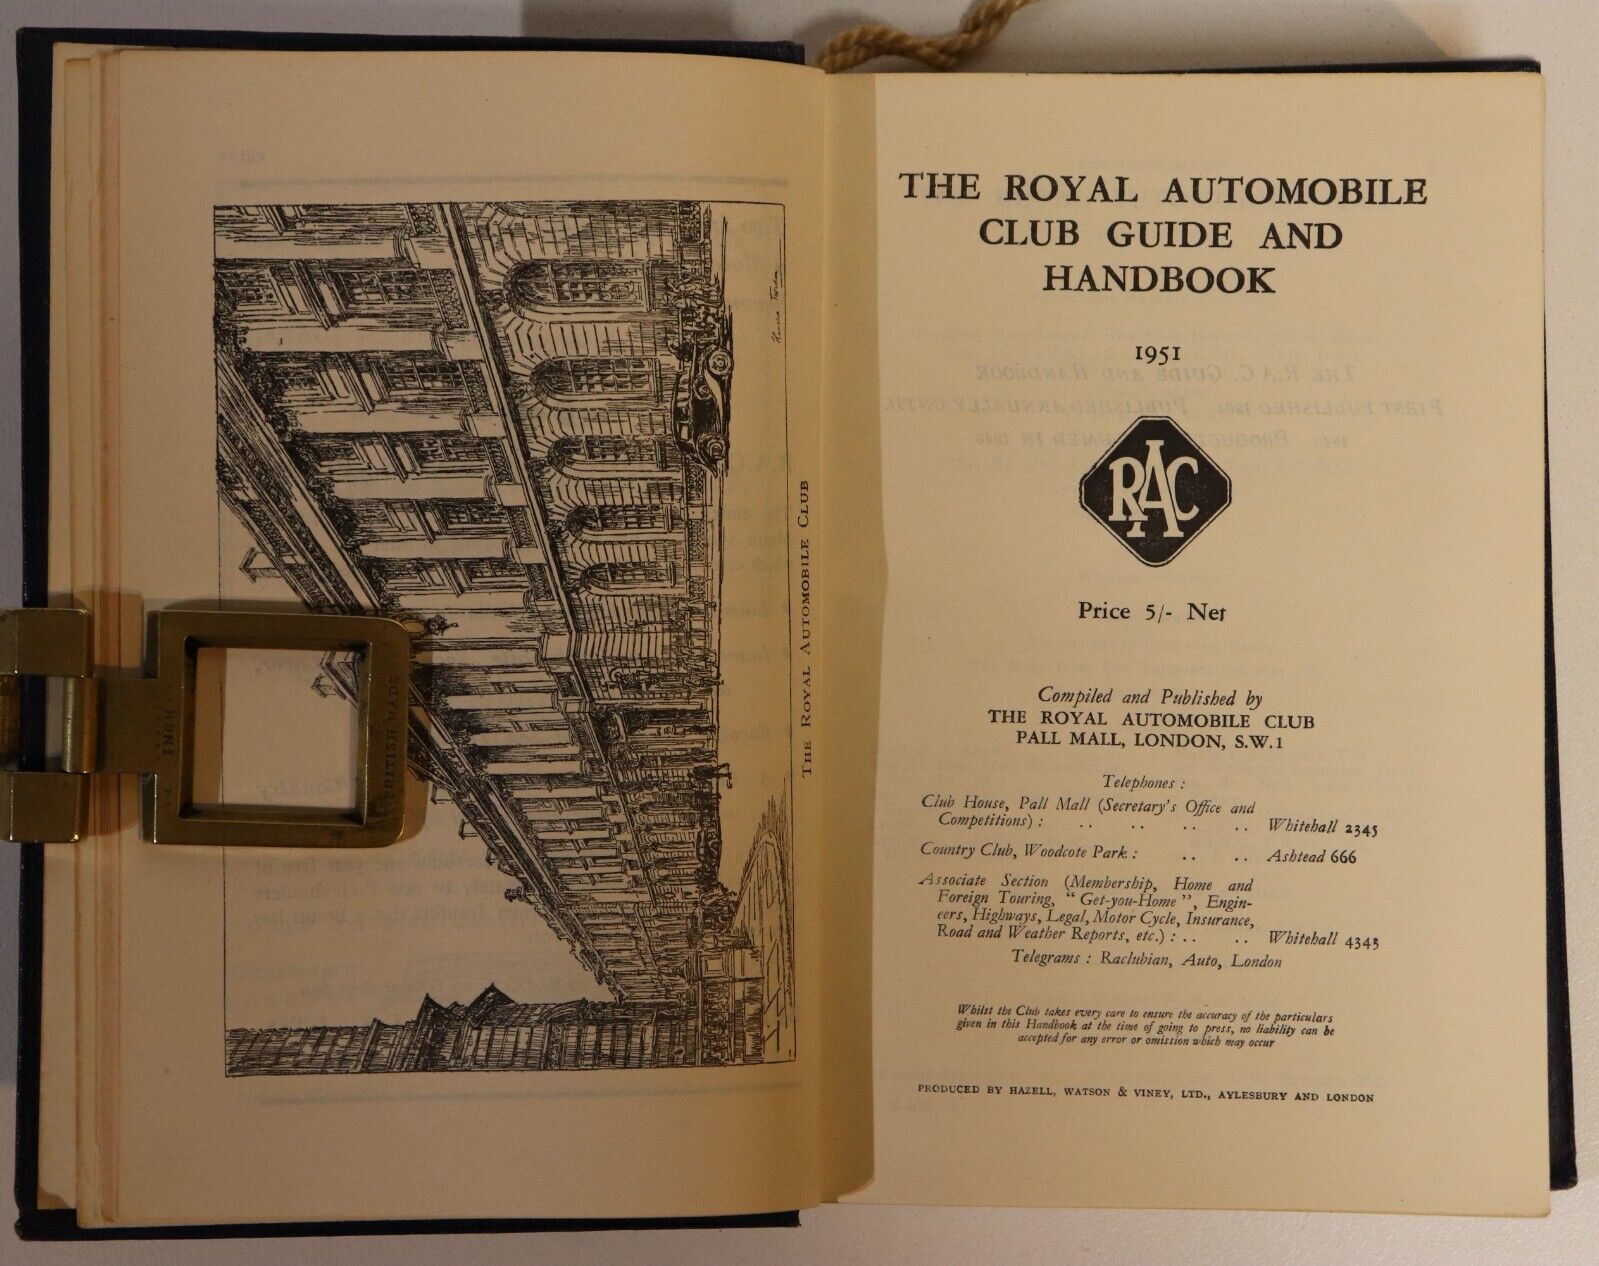 Royal Automobile Club Guide For 1951 - Vintage Motor Travel Guide Book